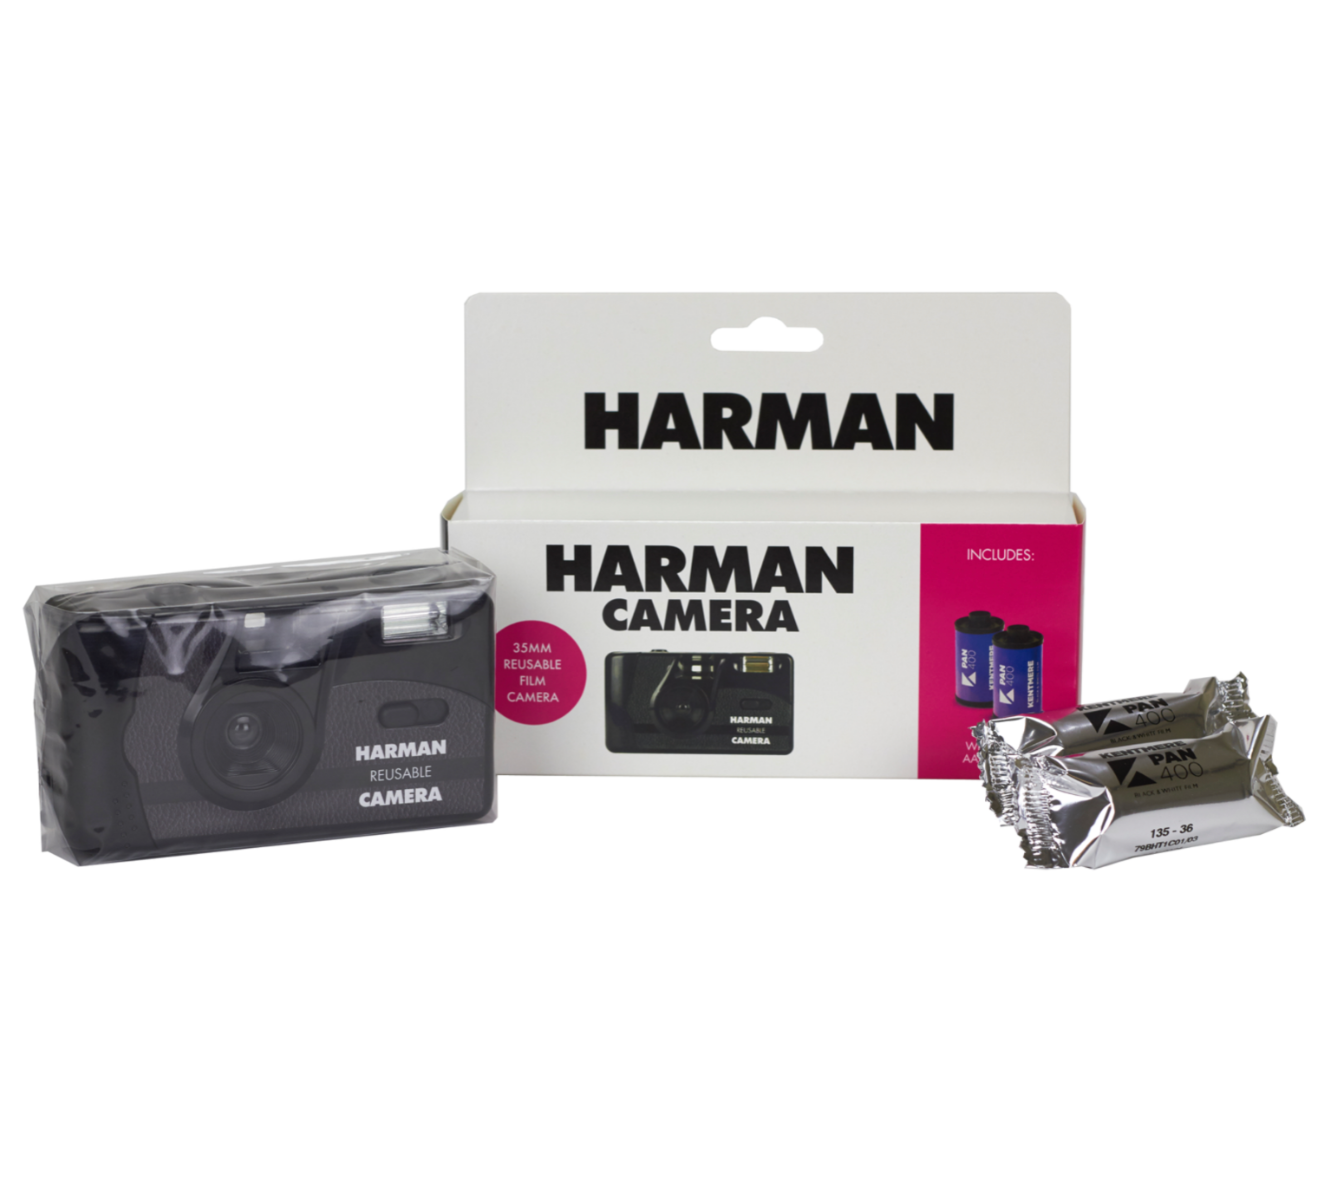 Product Image of Ilford Harman Re-useable 35mm Camera Kit Inc 2 Kentmere 400 36exp